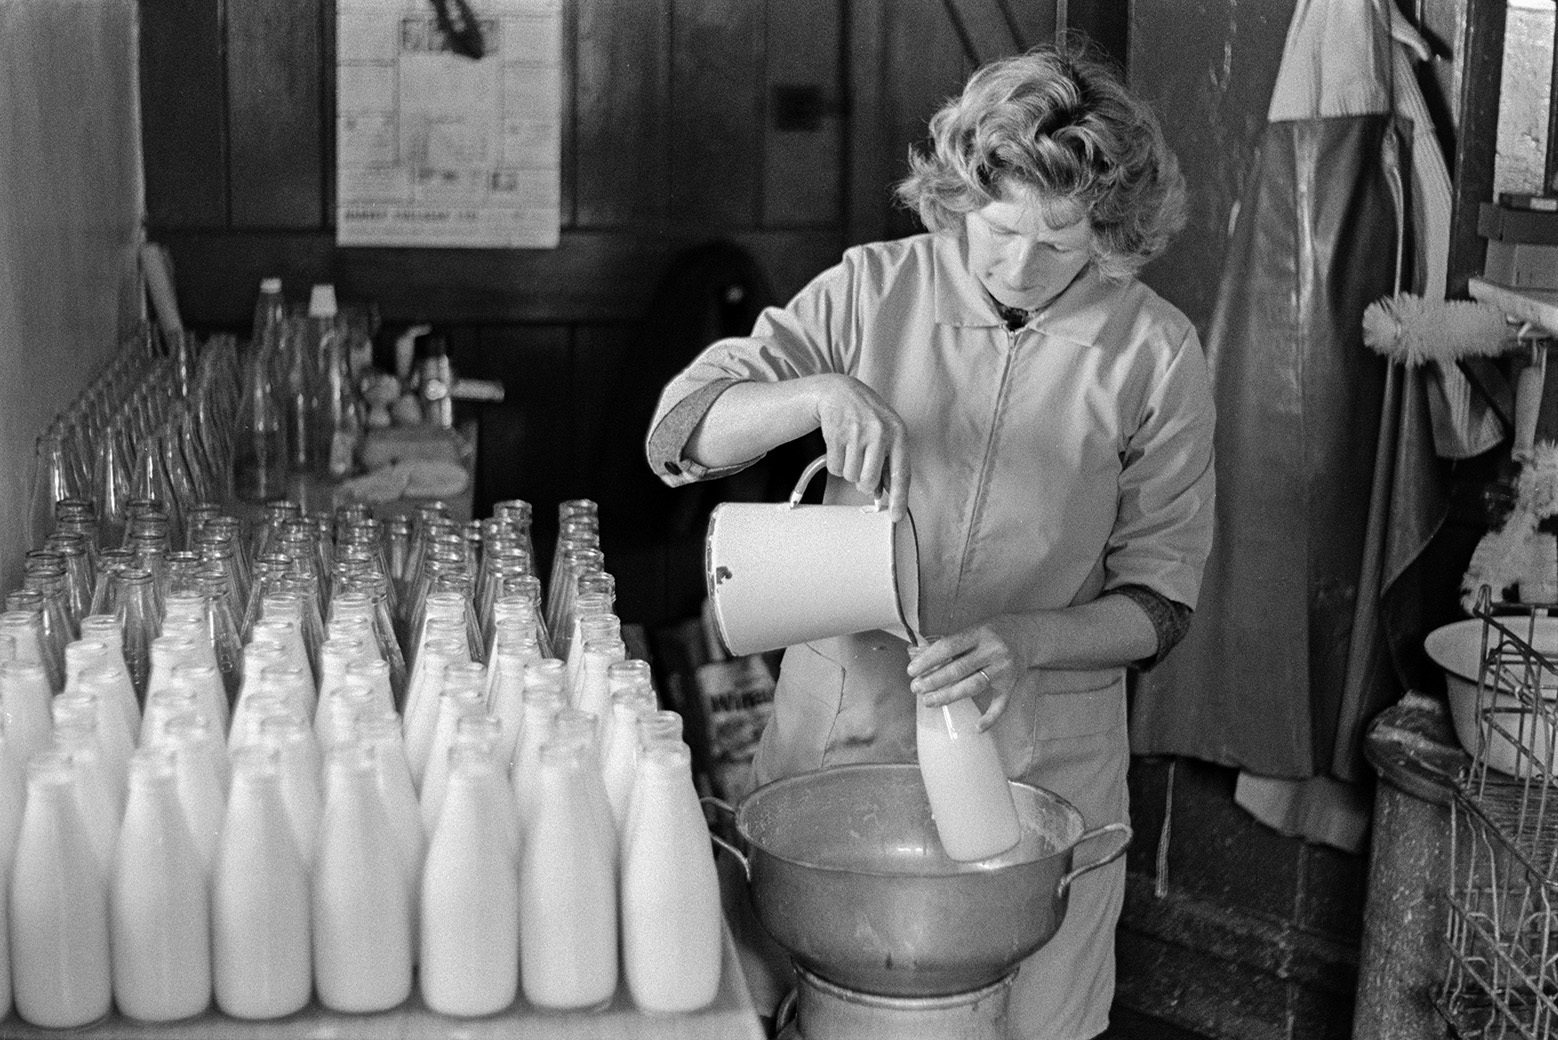 A woman filling milk bottles with milk in a dairy at Mill Road Farm, Beaford. She is filling the bottles over a ilk churn. The farm was also known as Jeffrys.